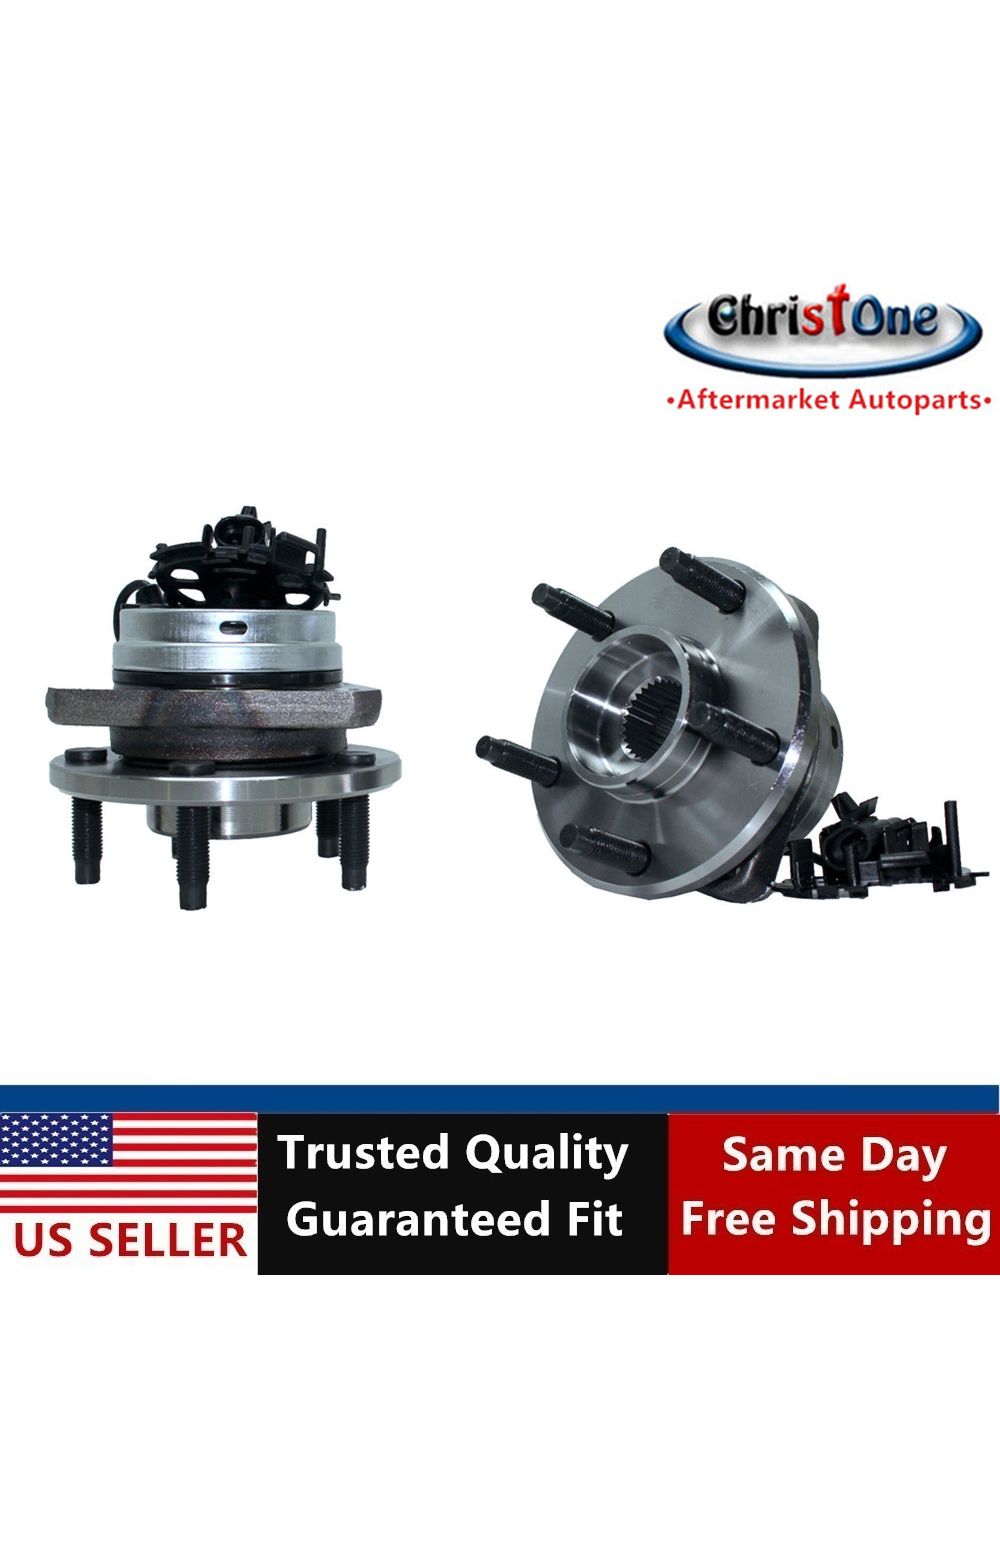 Bapmic 513215 Front Wheel Bearing Hub Assembly for 2004 2005 2006 2007 Chevy Malibu Pontiac G6 5 Lugs No ABS Pack of 2